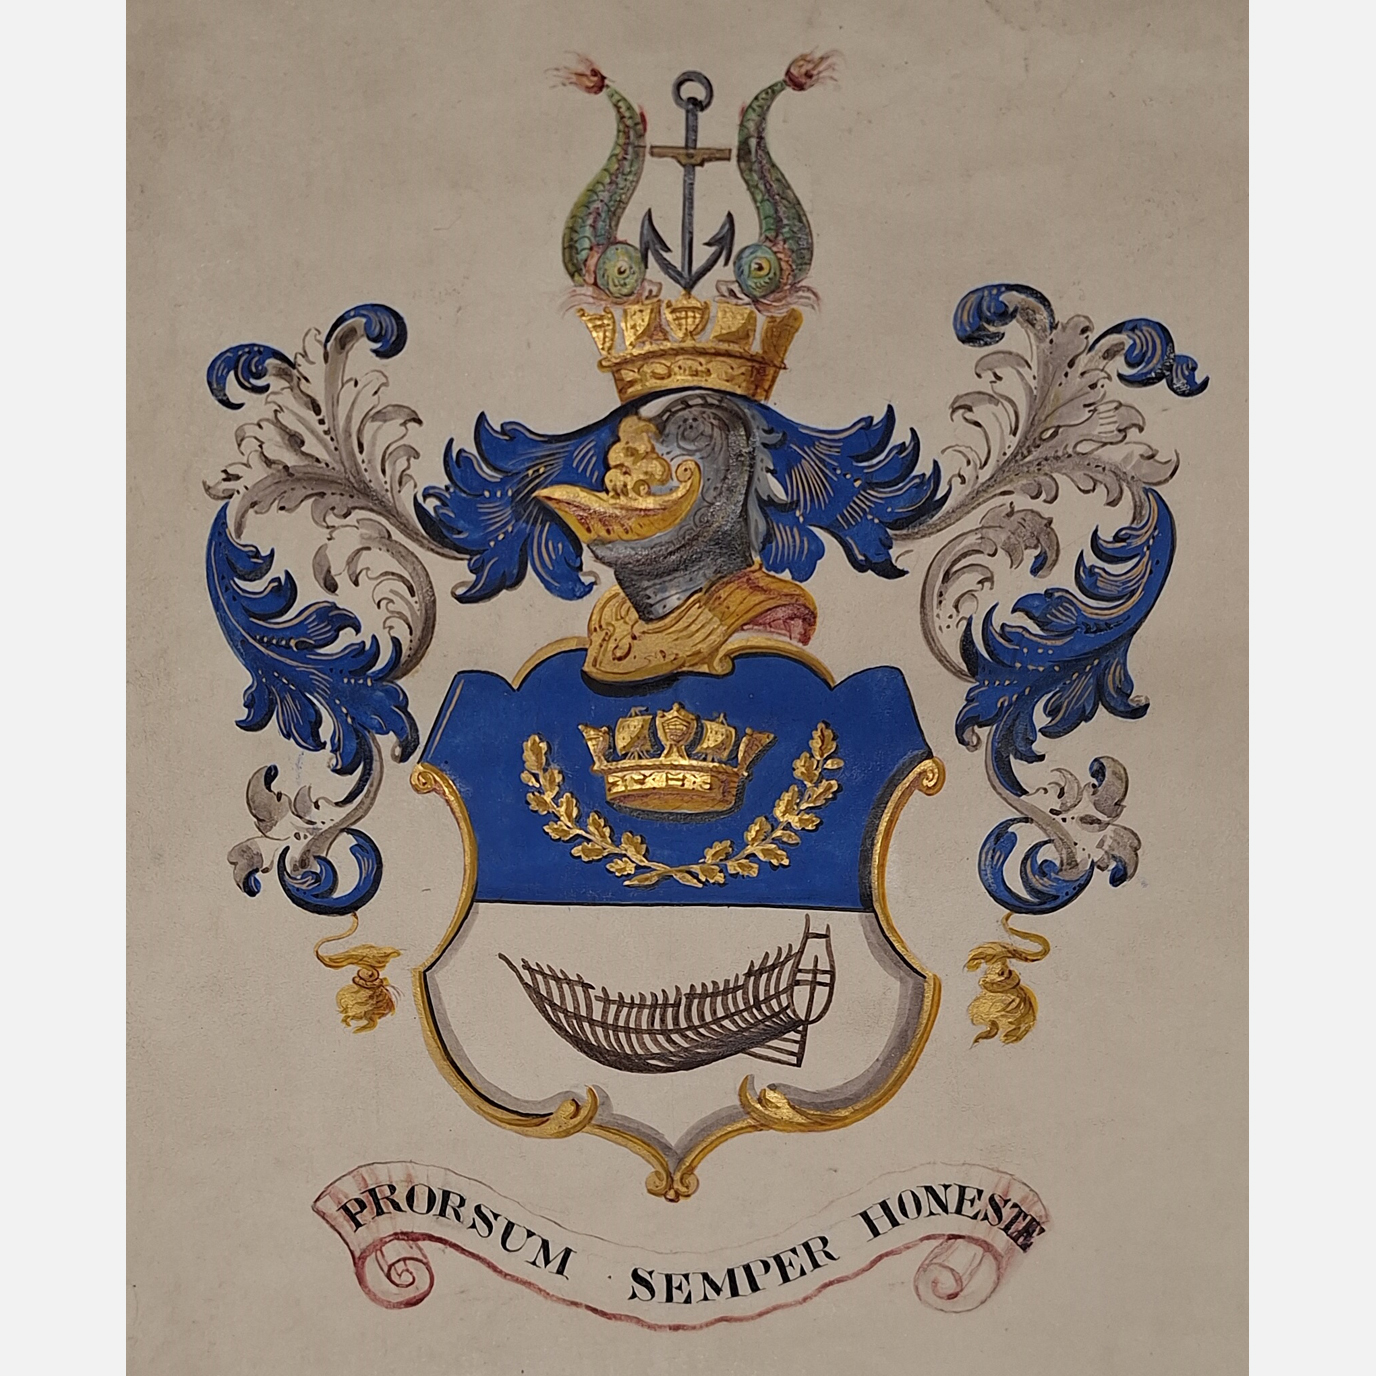 Extract from 1819/2, grant of arms to Devonport, 1876. Courtesy of The Box, Plymouth.